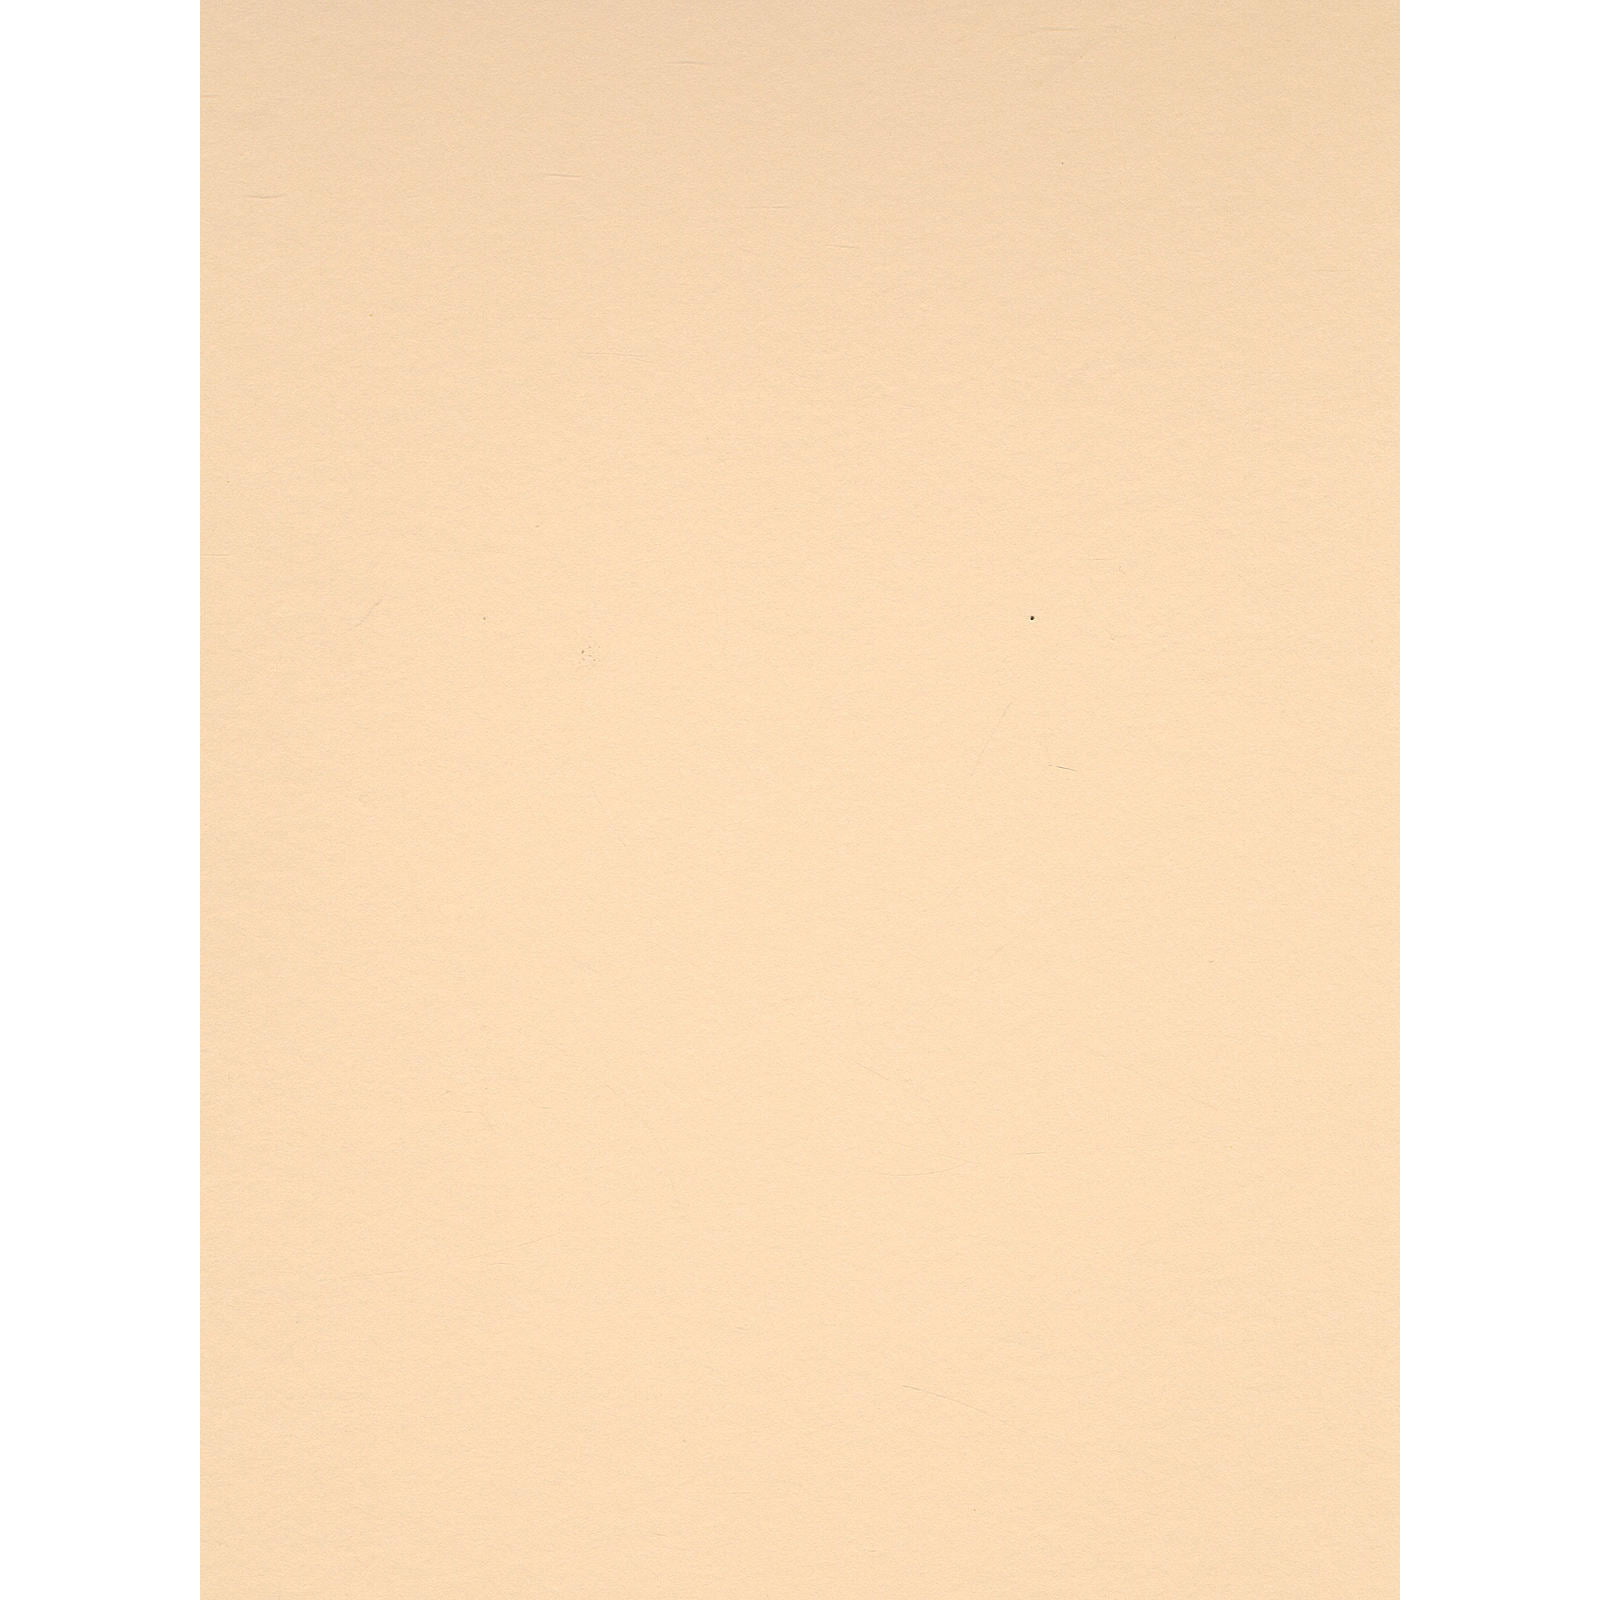 Colorline Heavyweight Paper Sheets Light Grey 300 GSM 19 in. x 25 in.